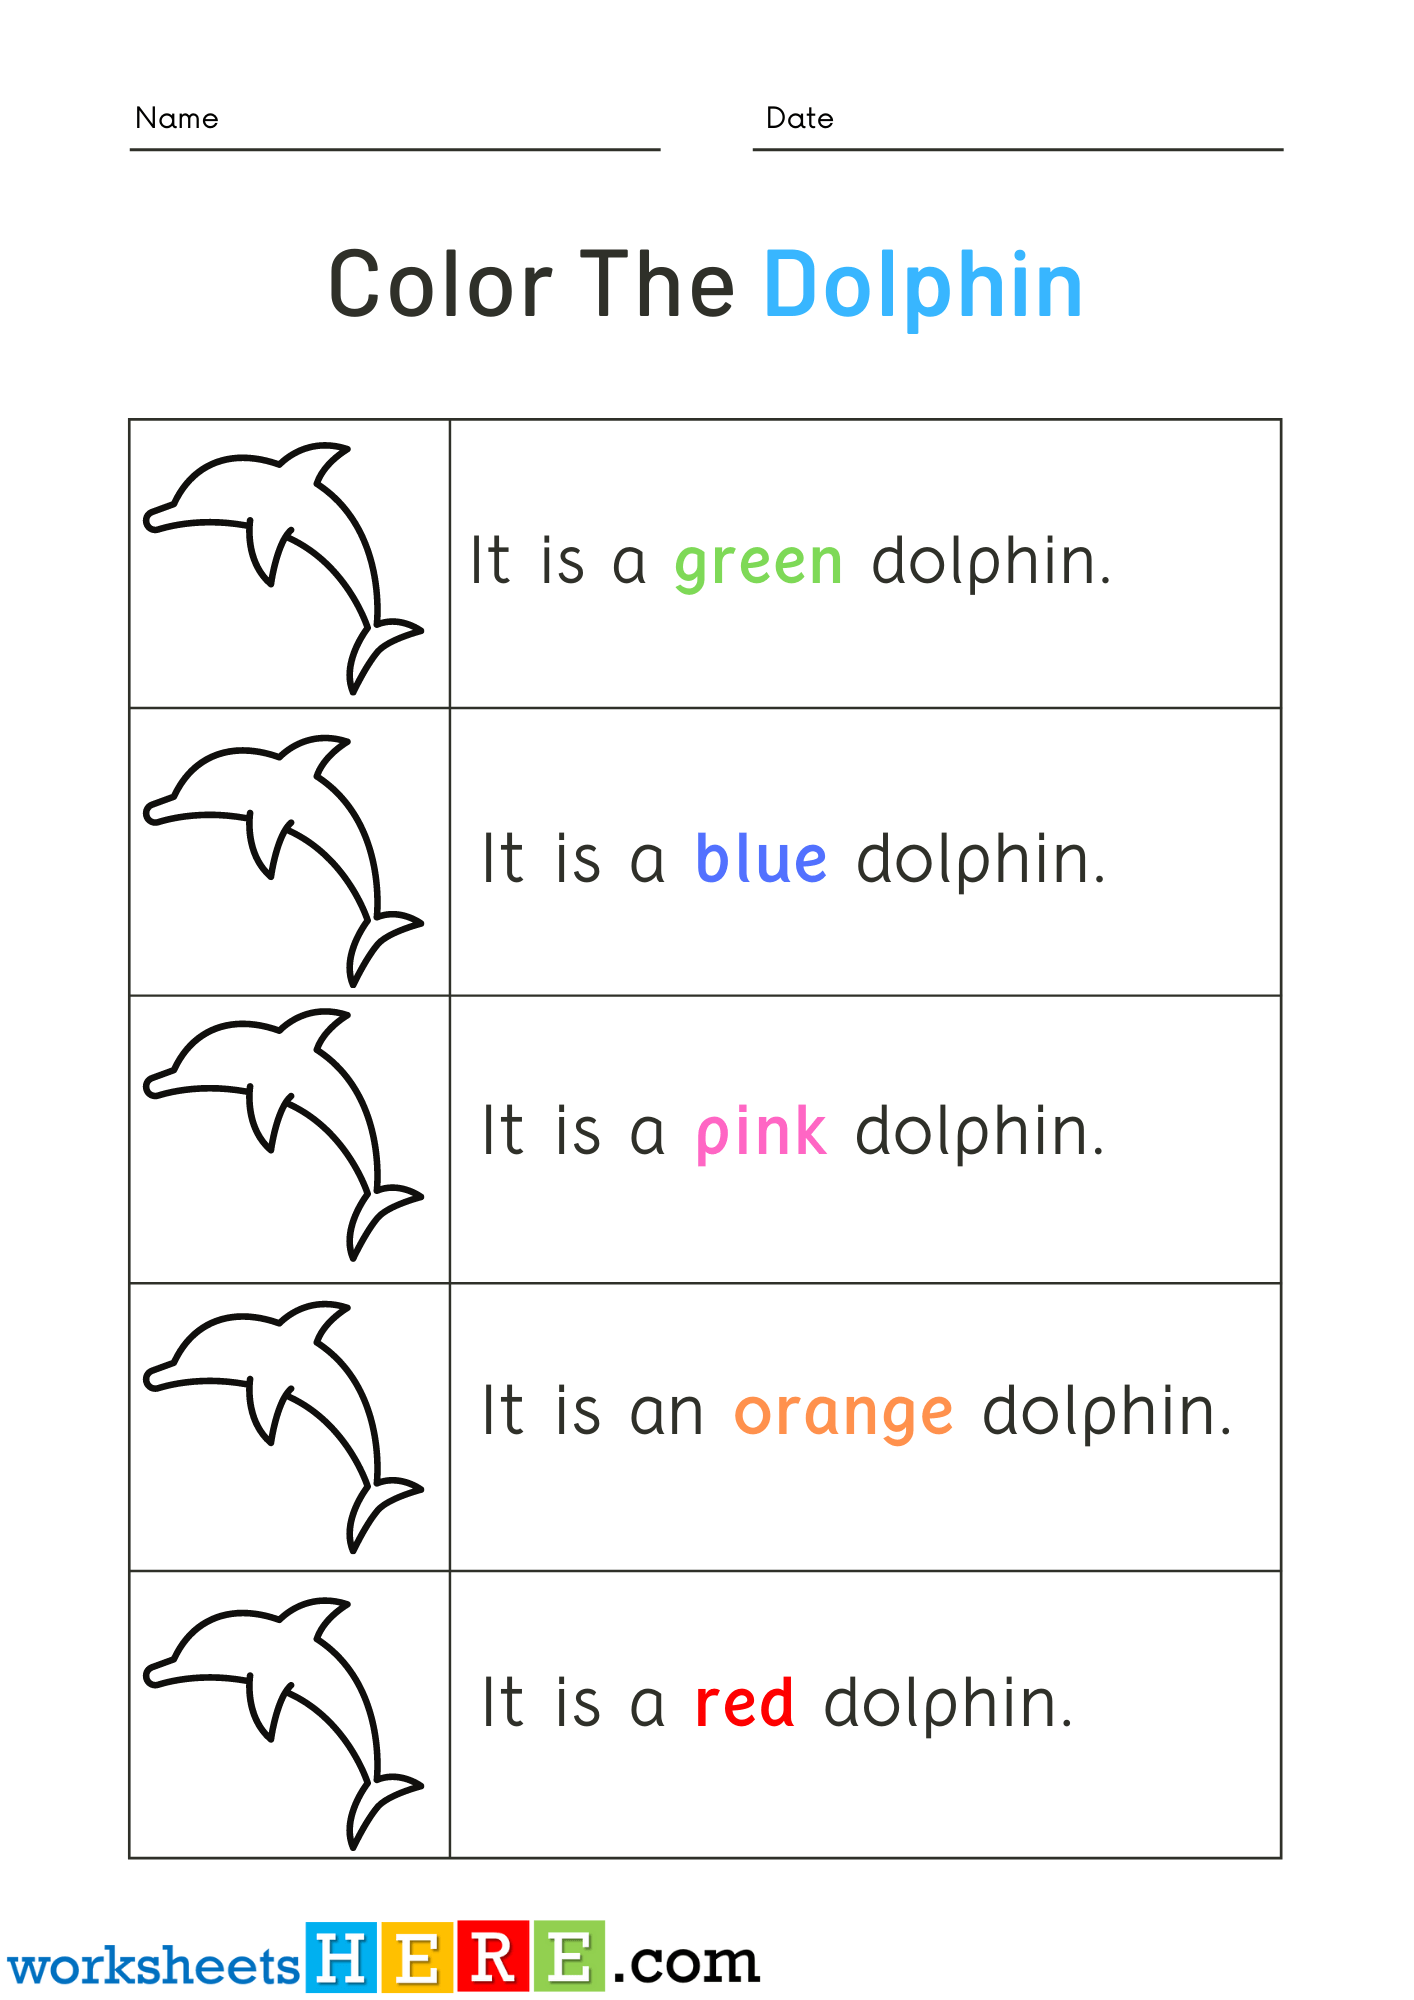 Read Words and Color Dolphin Pictures Activity PDF Worksheets For Kindergarten